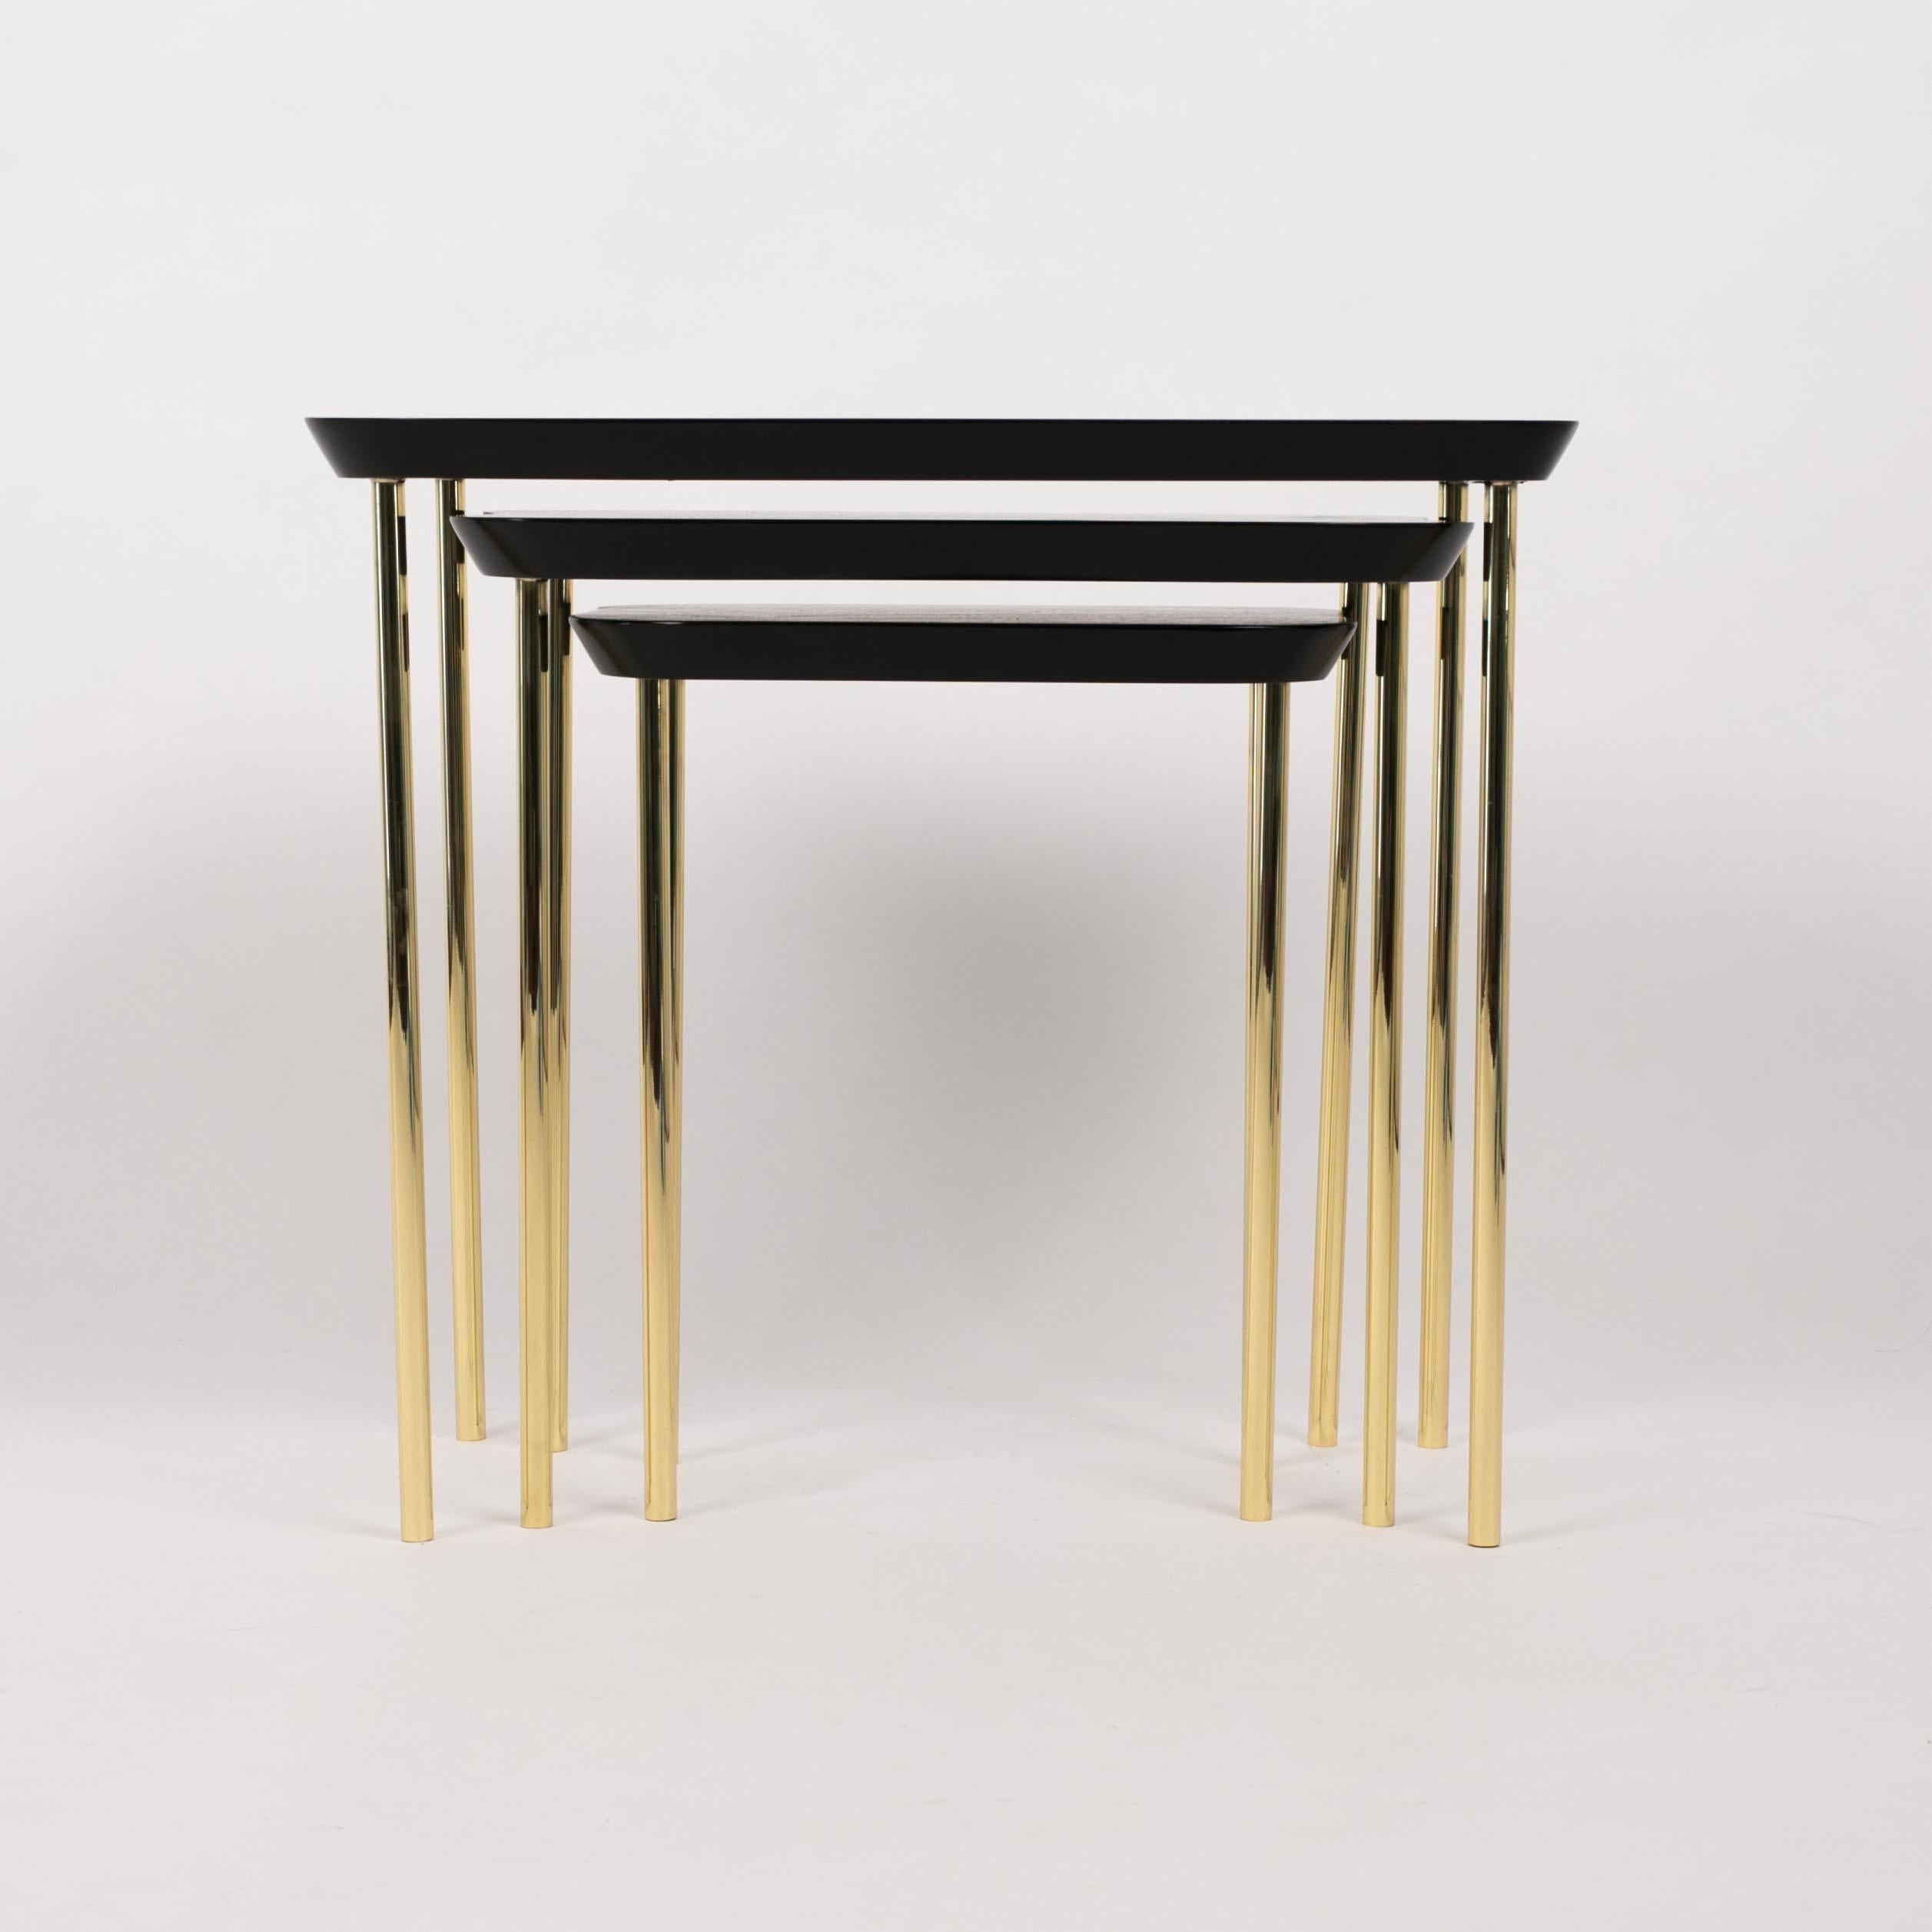 A set of three modernist nesting tables from Boston's Charak modern. Charak pieces are distinguished by their transitional qualities, and these modern pieces are also in conversation with Hollywood Regency and Art Deco silhouettes. The largest table